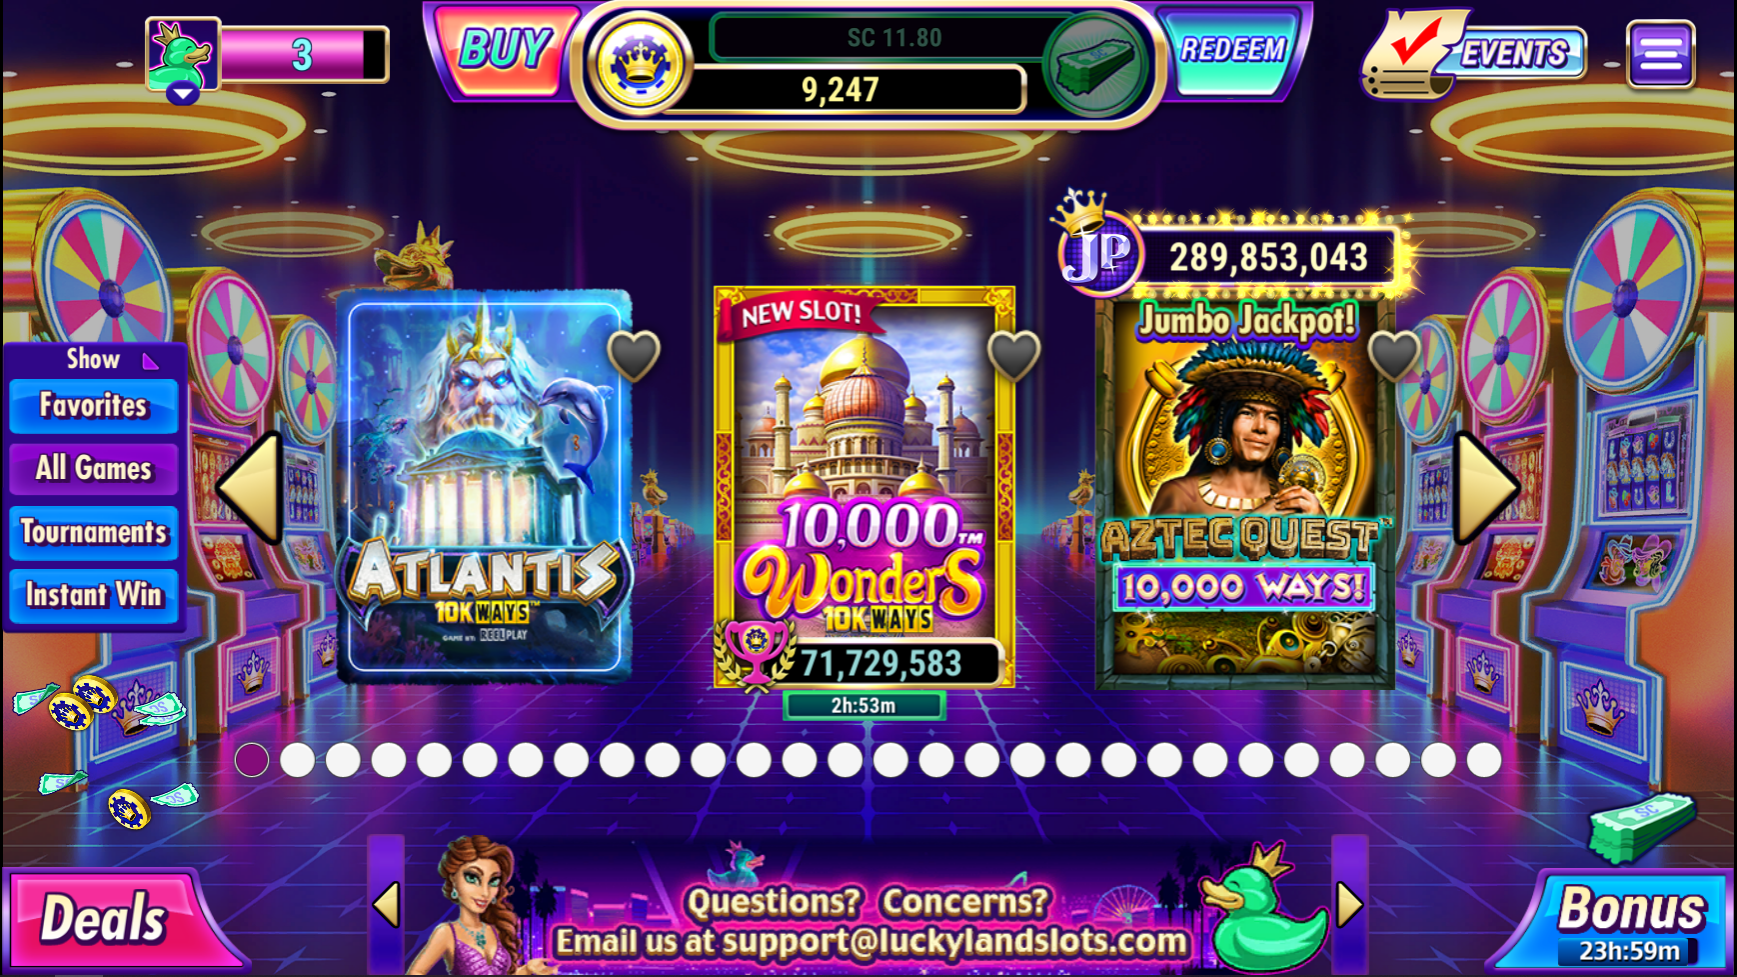 10 Ideas About Eurojackpot play casino That Really Work